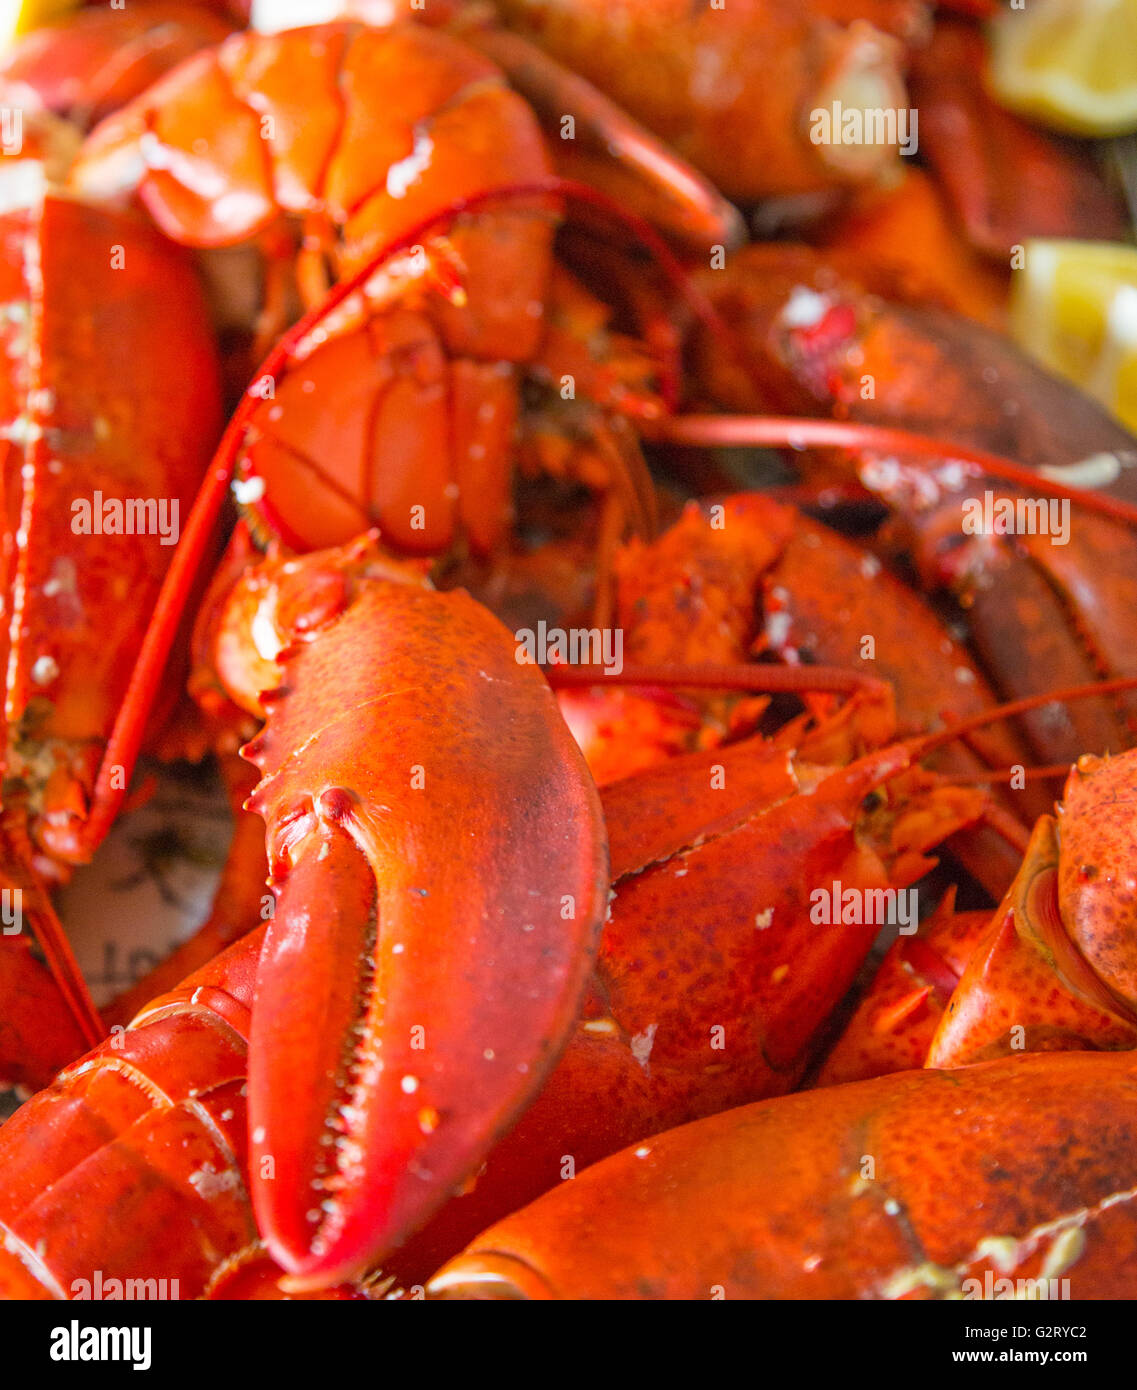 a detail image of a bunch of freshly cooked lobsters Stock Photo